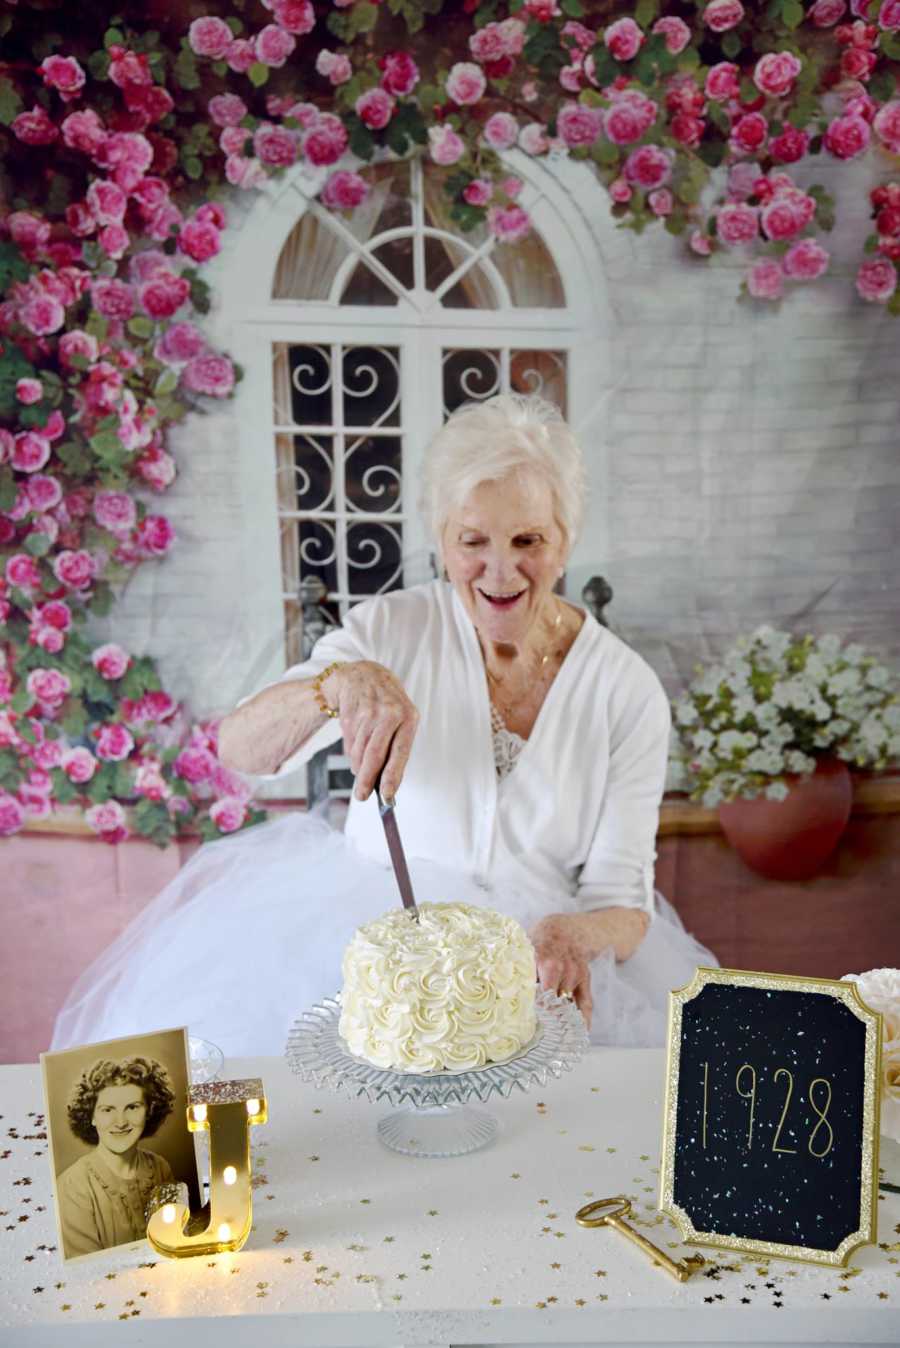 90 year old woman cuts in to birthday cake next to light up letter J, picture of her younger self and chalk board